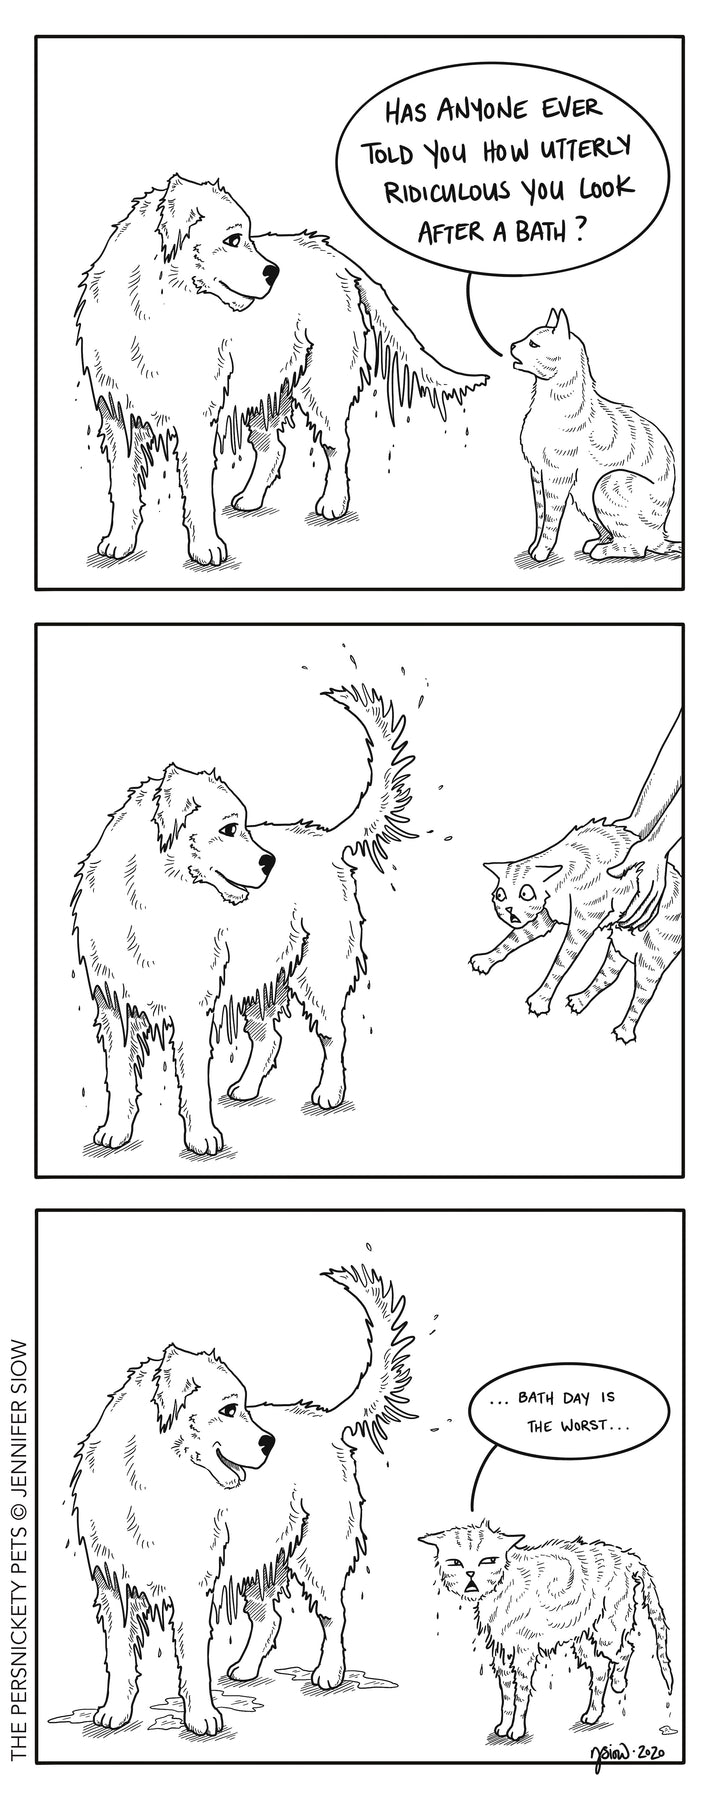 Persimmon Peak: The Persnickety Pets comic 12/13/20